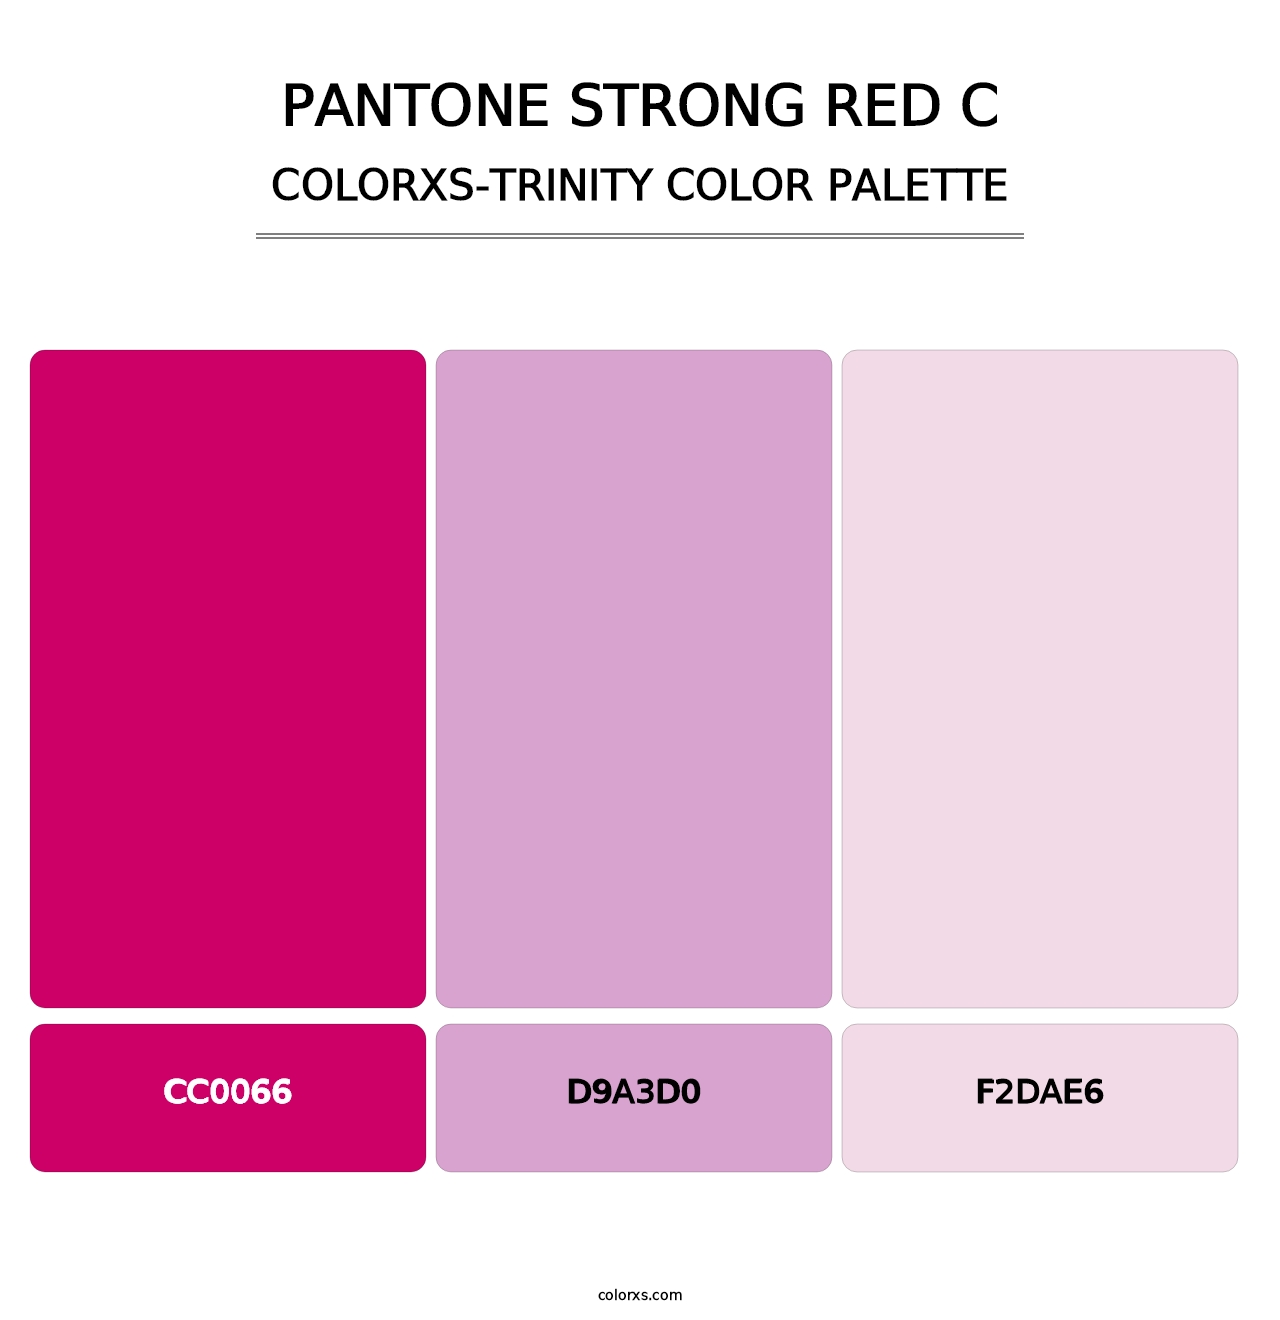 PANTONE Strong Red C - Colorxs Trinity Palette